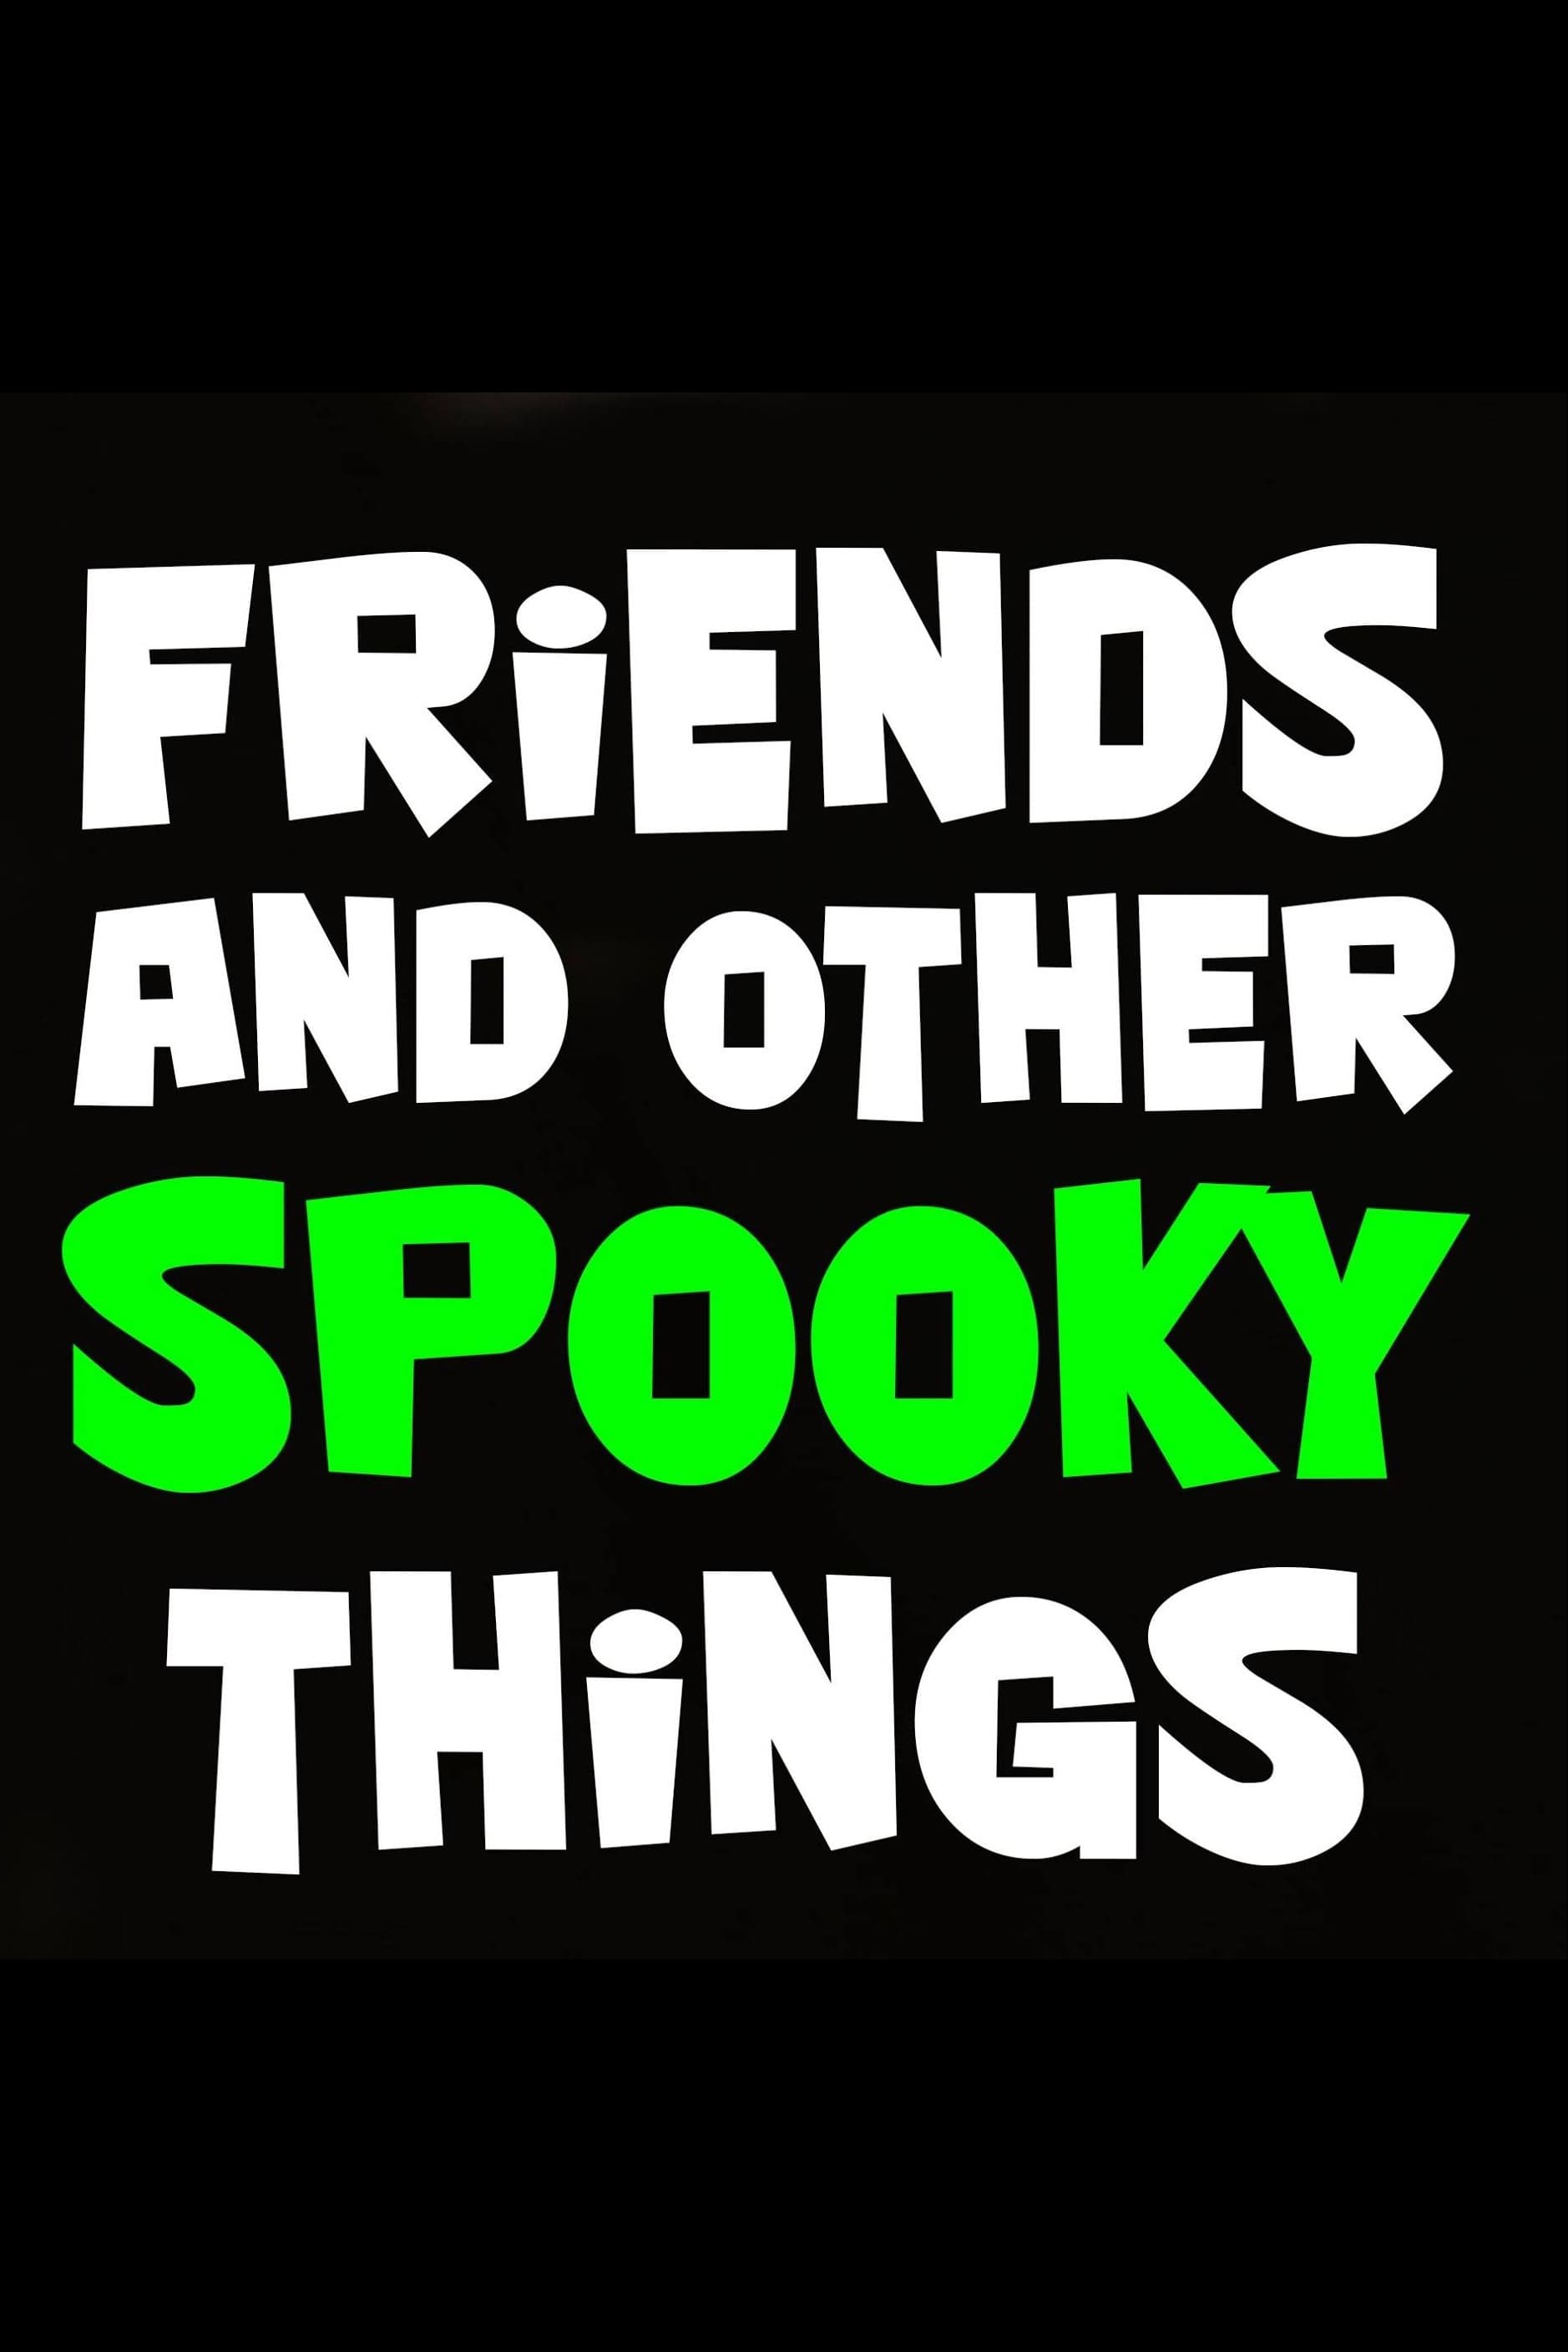 Friends and Other Spooky Things